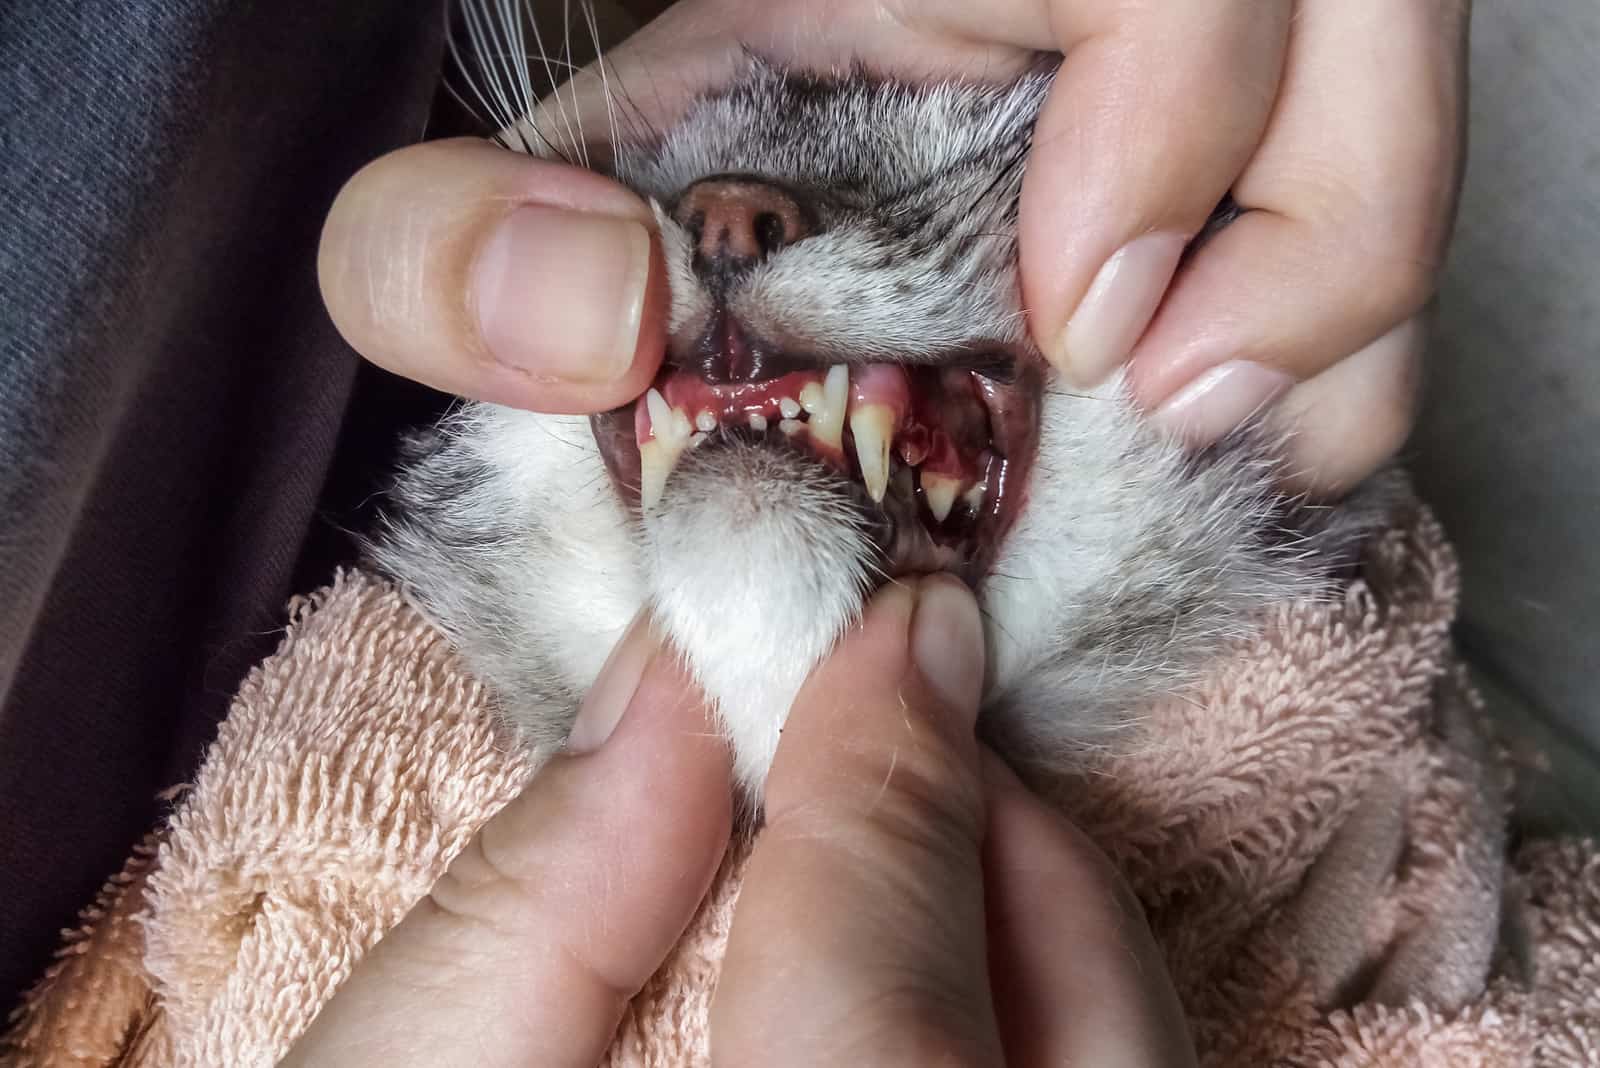 person examining a cat's mouth